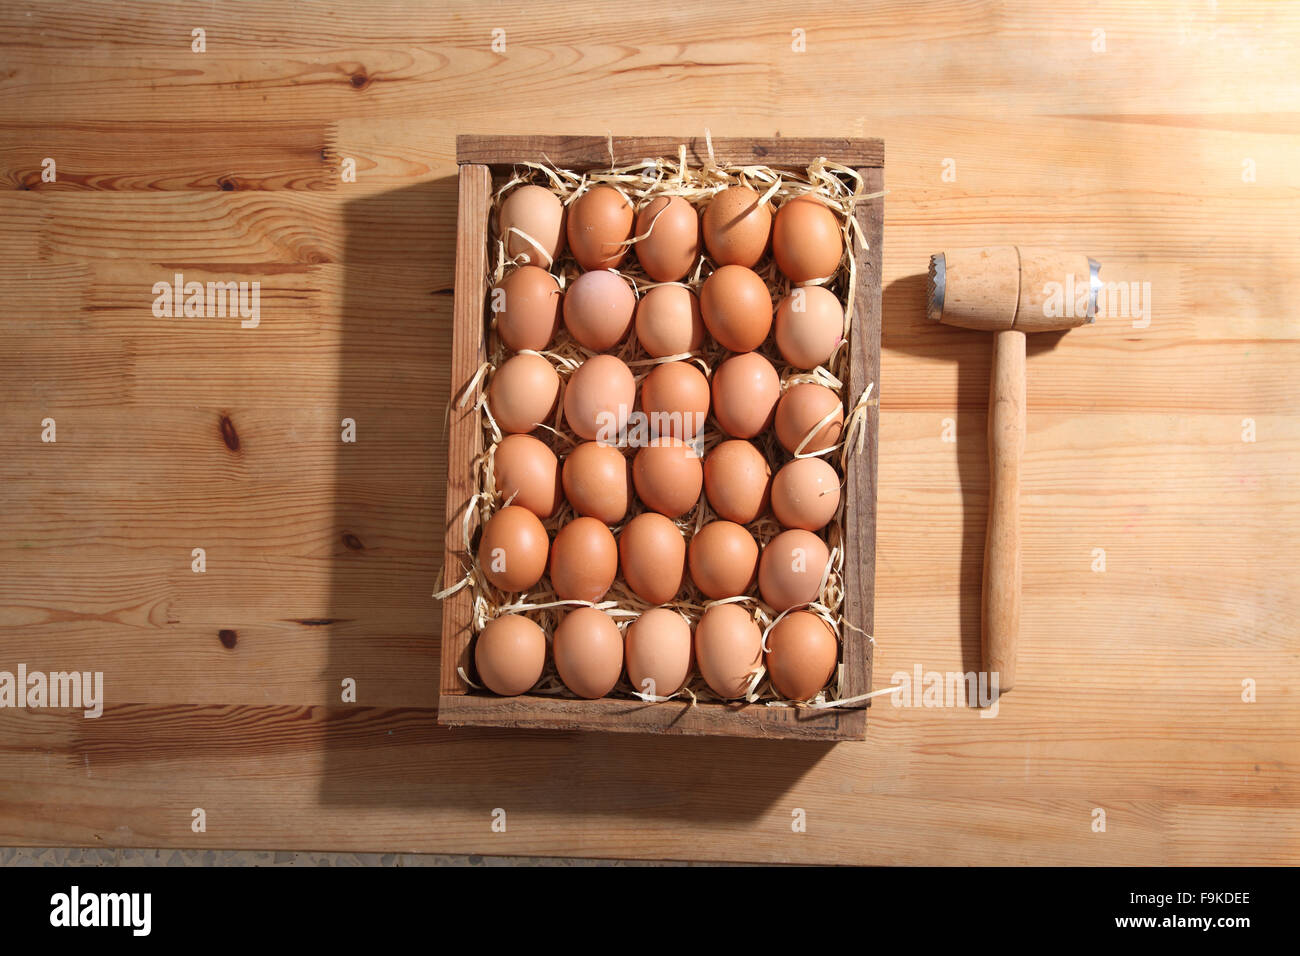 bunch of fresh brown eggs and some straw in a wooden crate Stock Photo